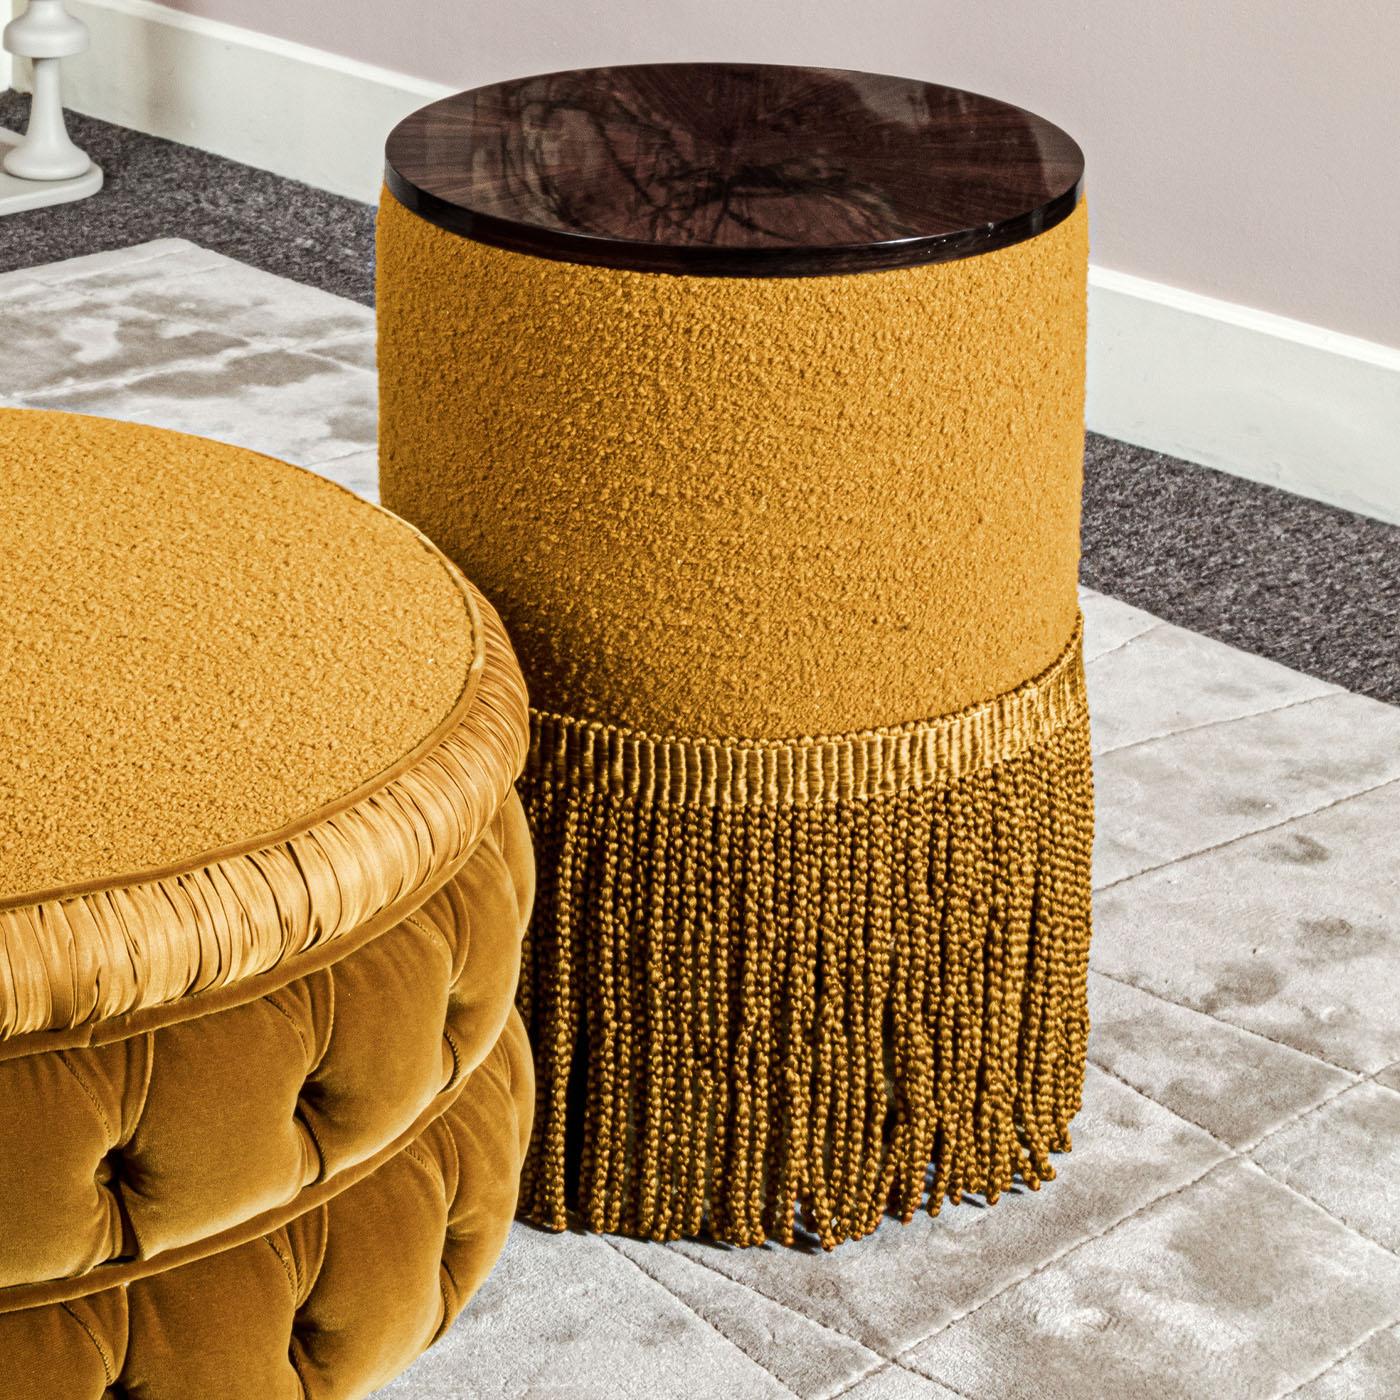 This handcrafted upholstered side table, with a wooden top and an ochre color, exudes charm and versatility, making it a delightful addition to any room.